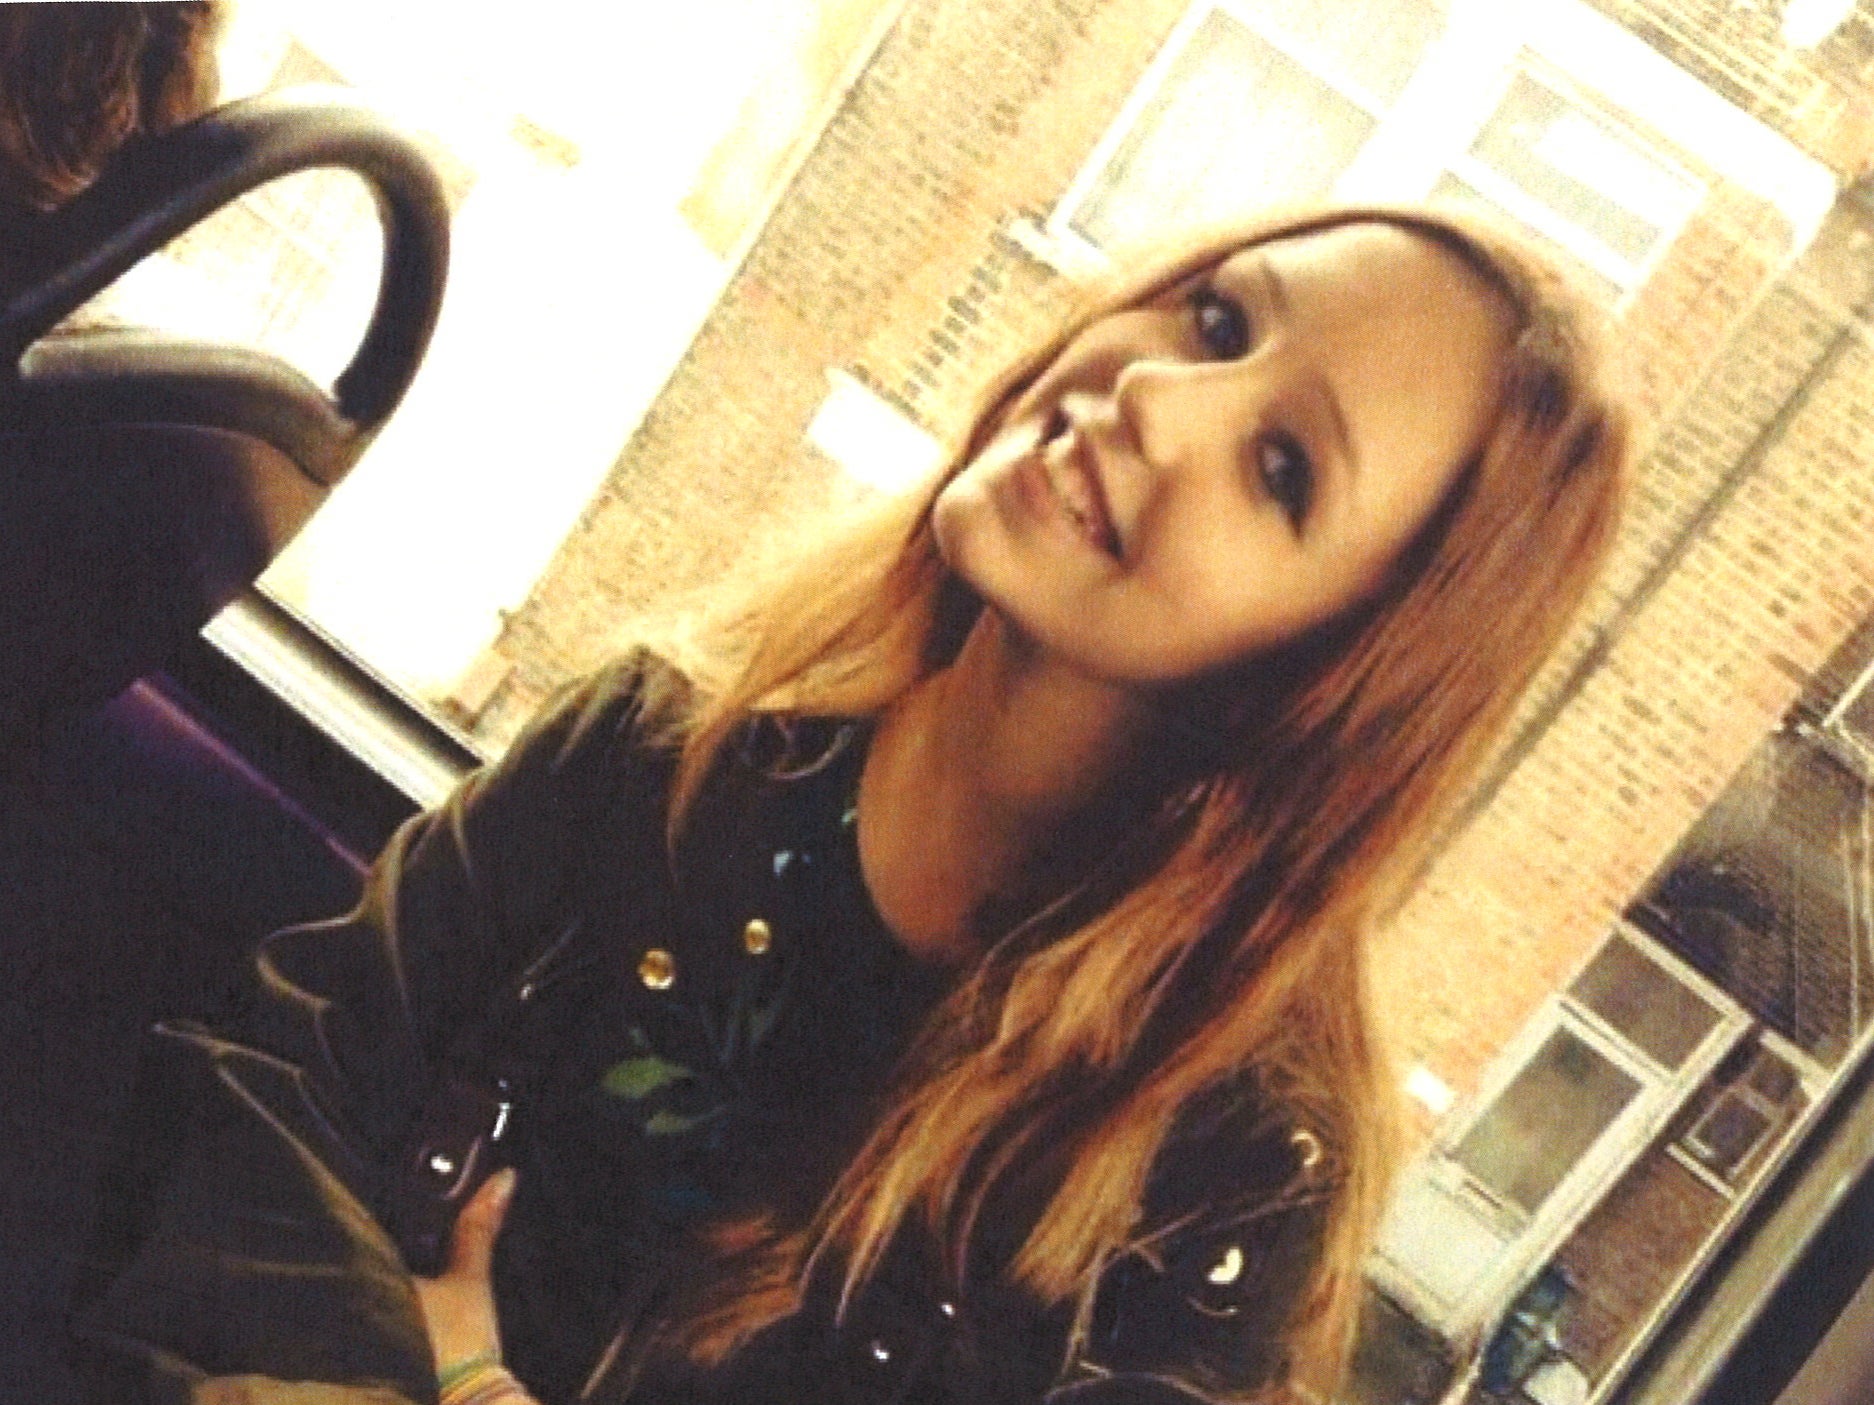 Alice Gross has been missing for three days